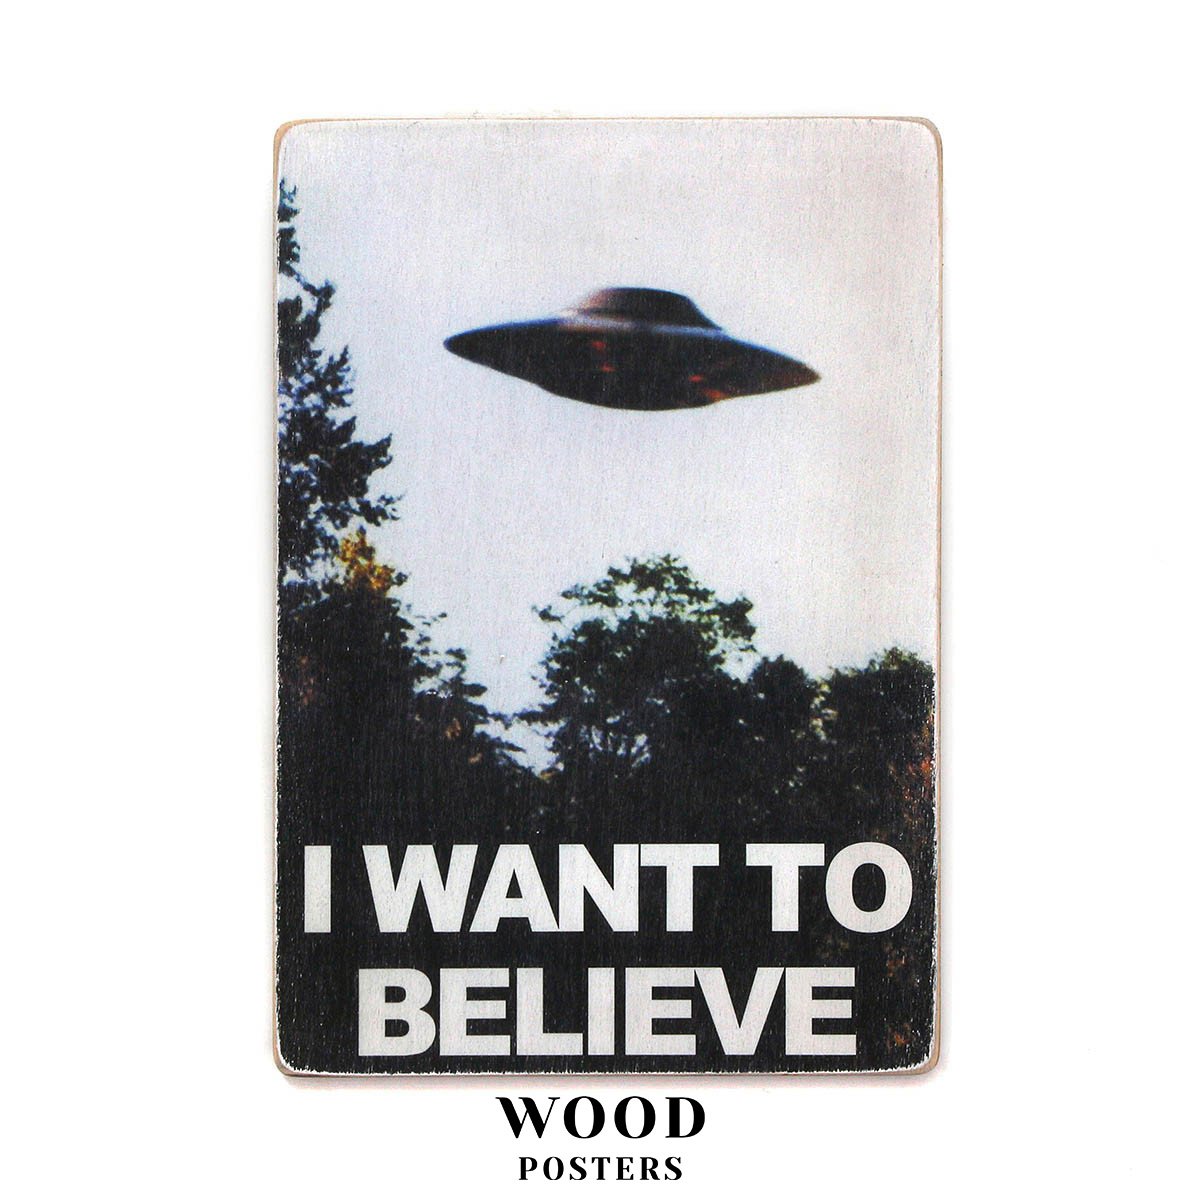 The X-Files. I want to believe